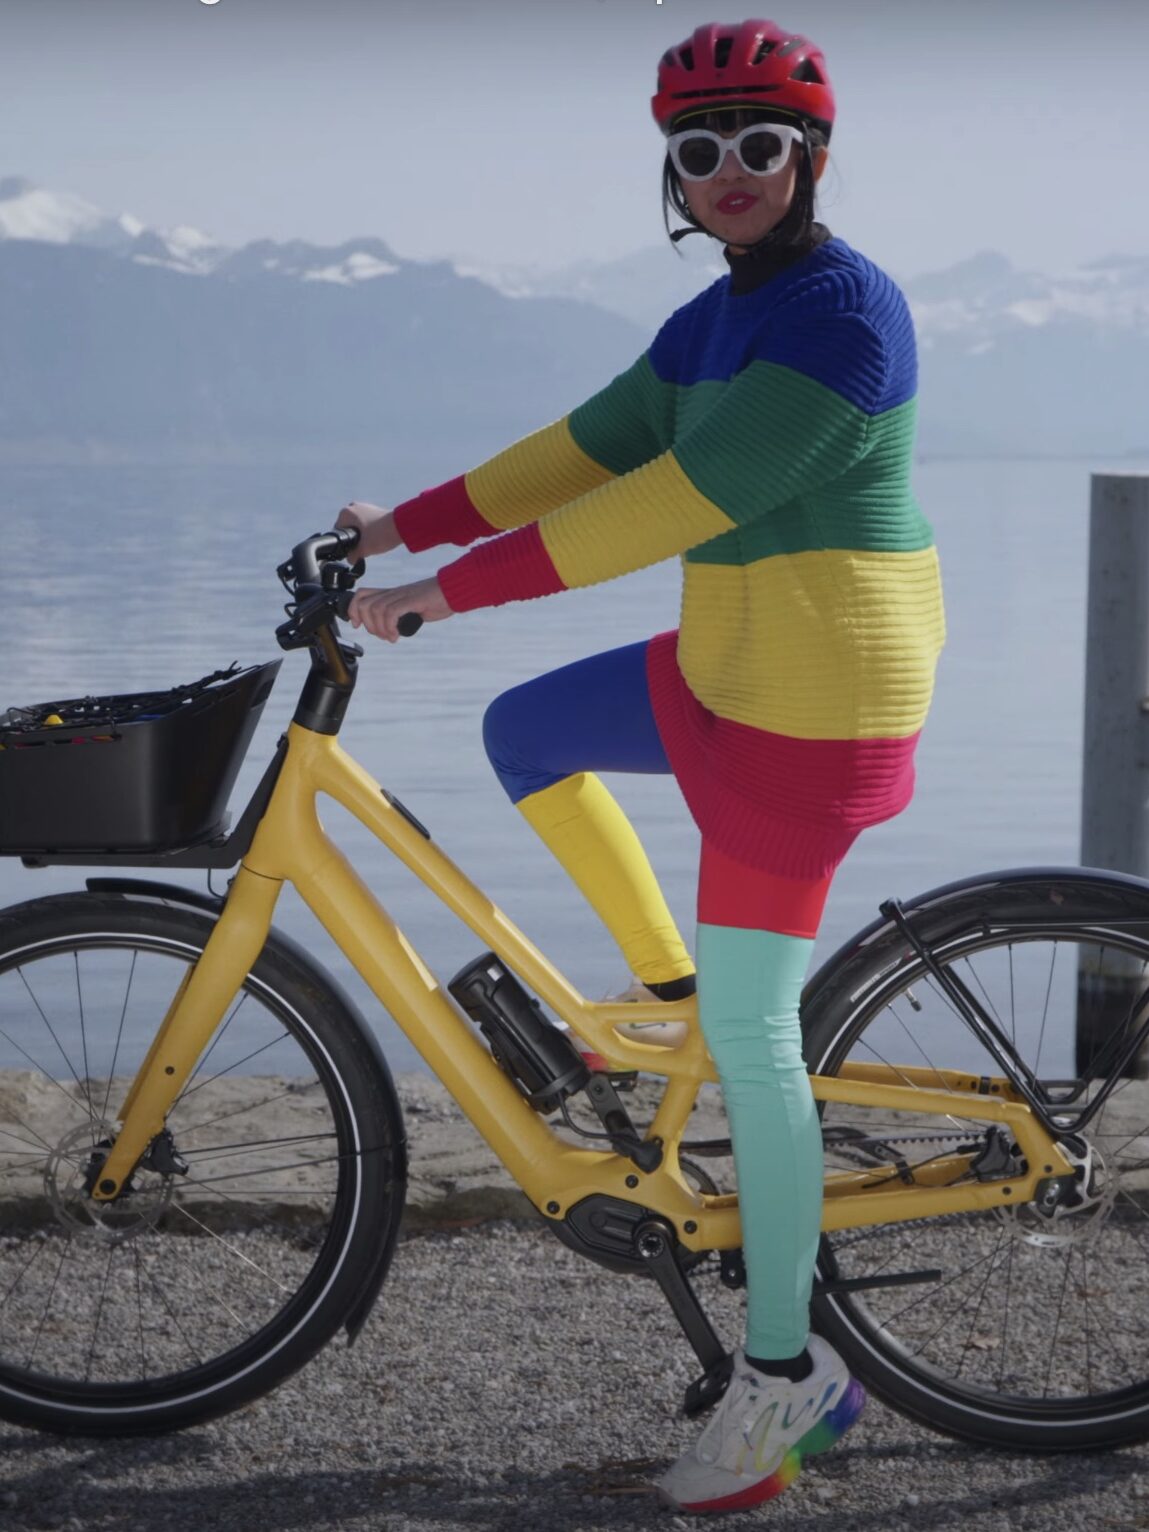 A model on a Specialized ebike